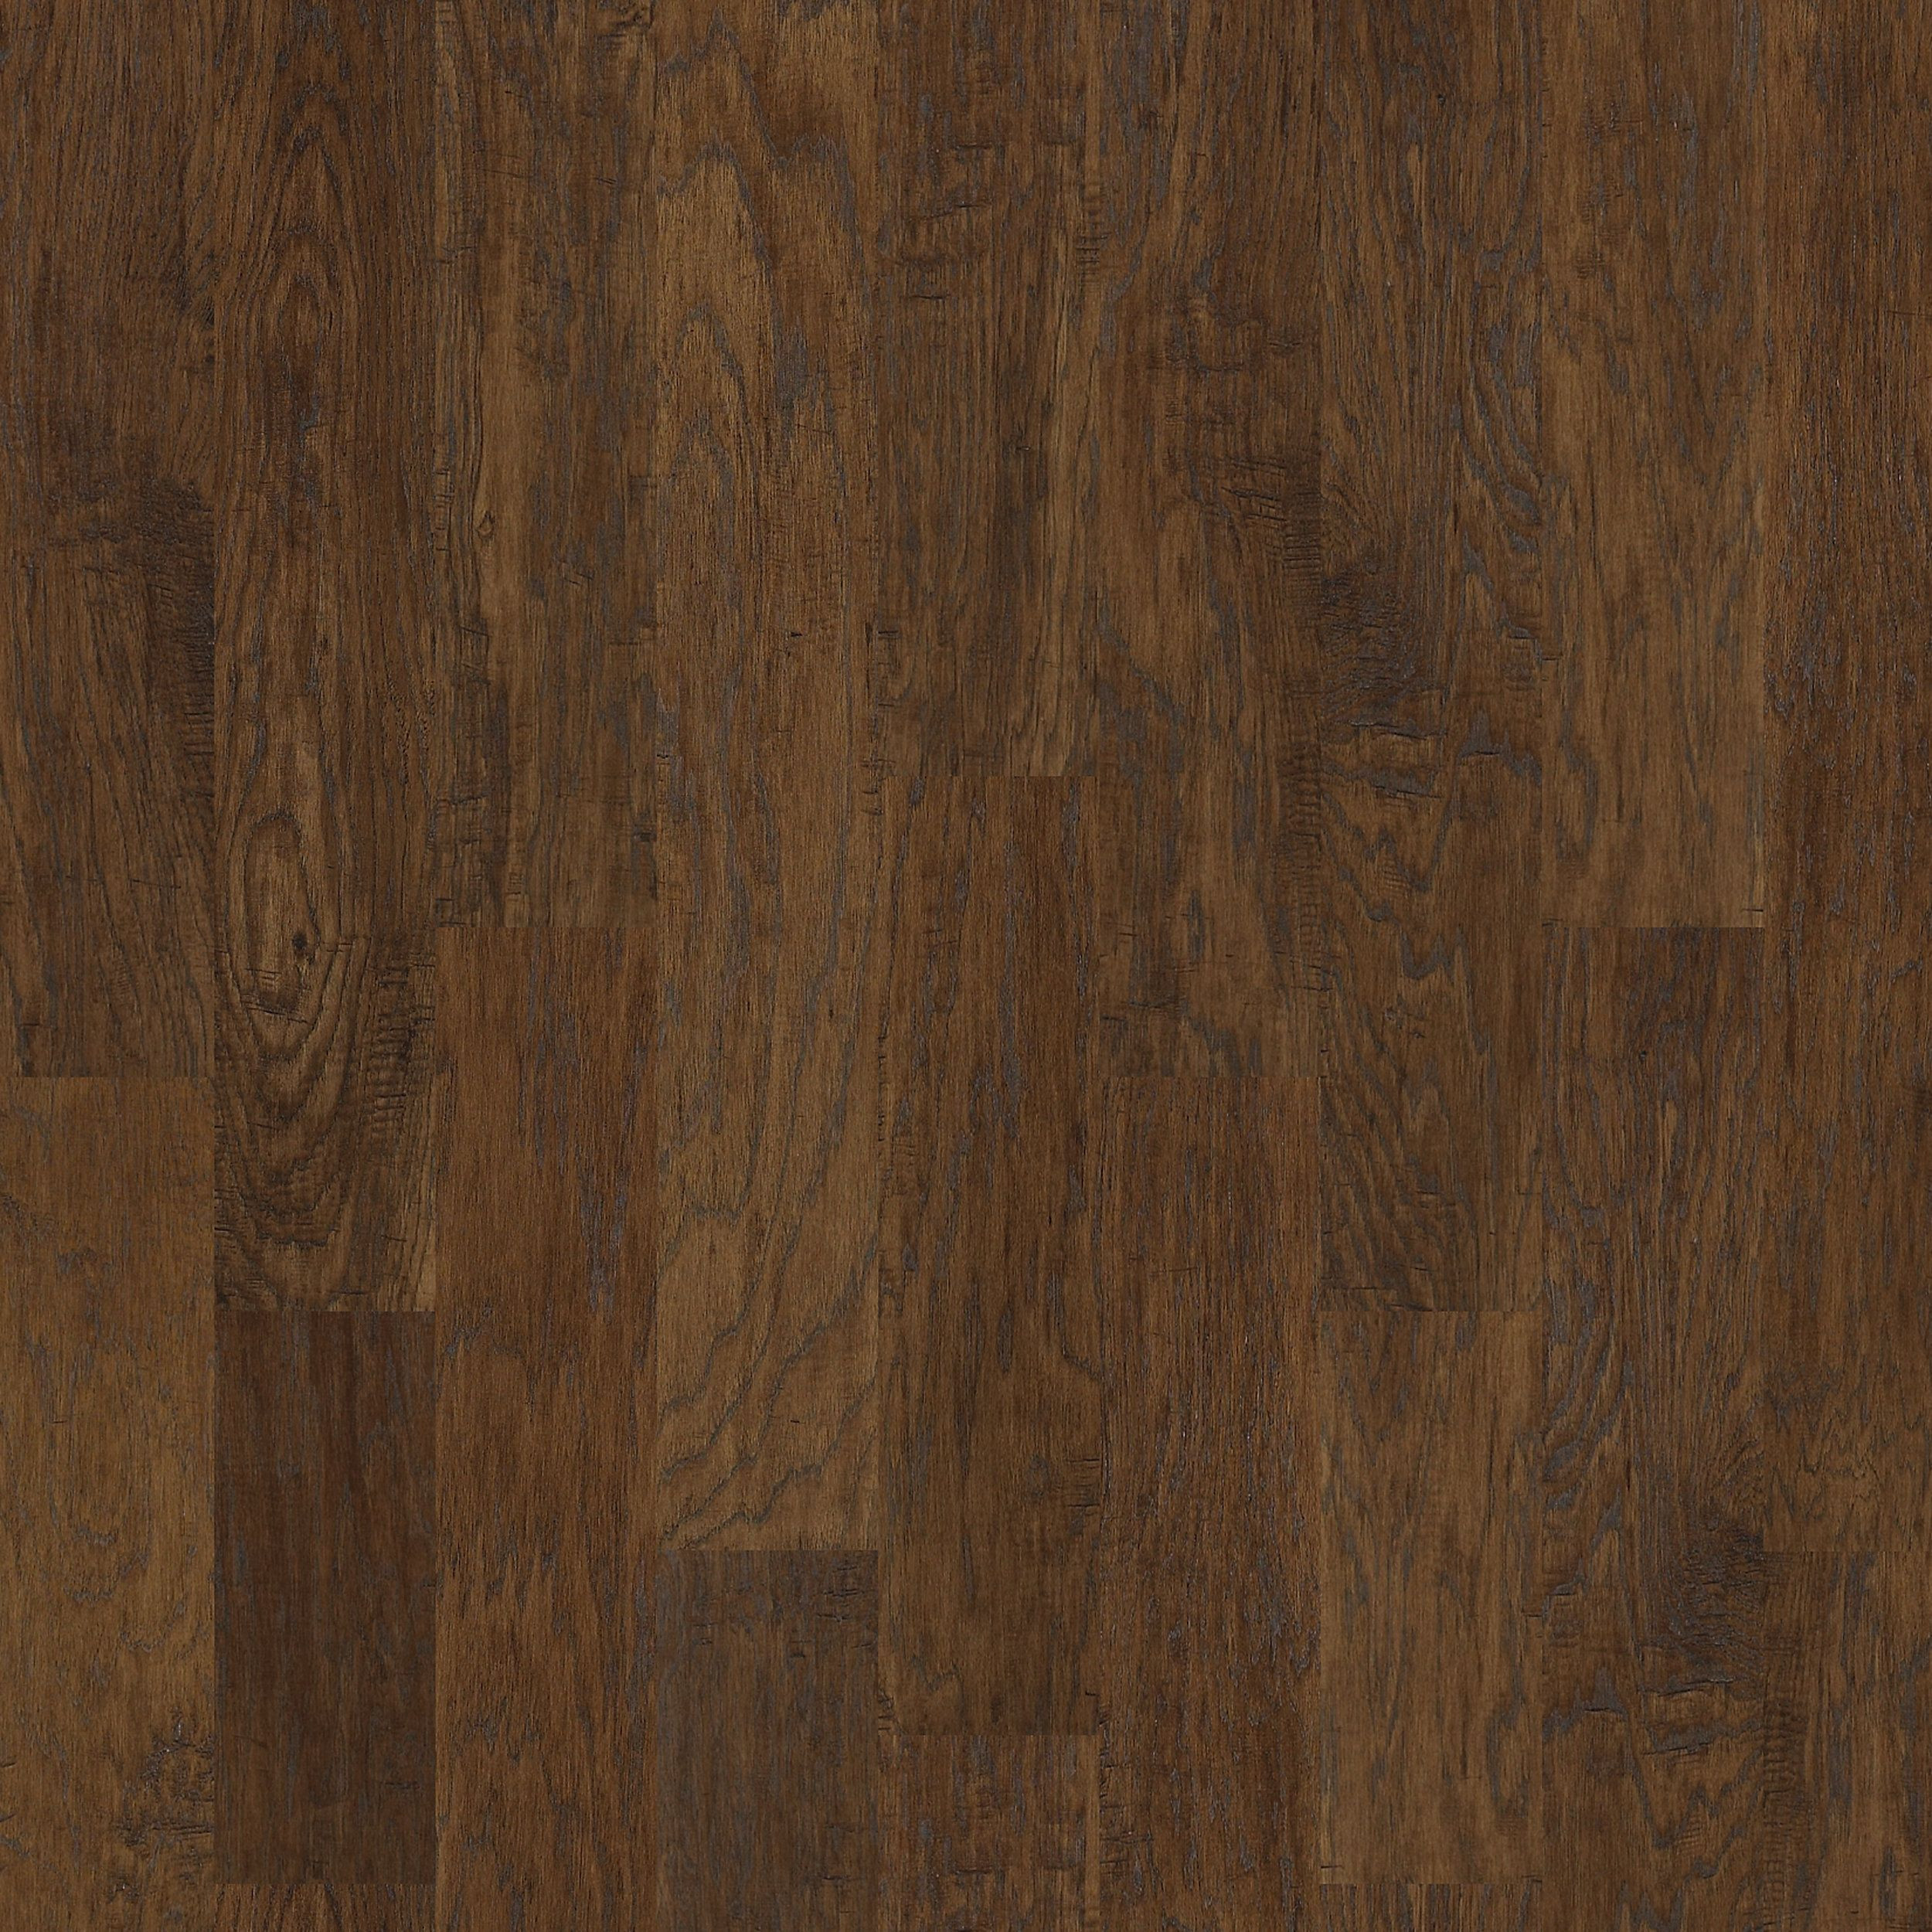 27 Stylish Engineered Hardwood Flooring Barrie 2024 free download engineered hardwood flooring barrie of this handscraped hickory wood flooring comes in a beautiful array of inside this handscraped hickory wood flooring comes in a beautiful array of colors